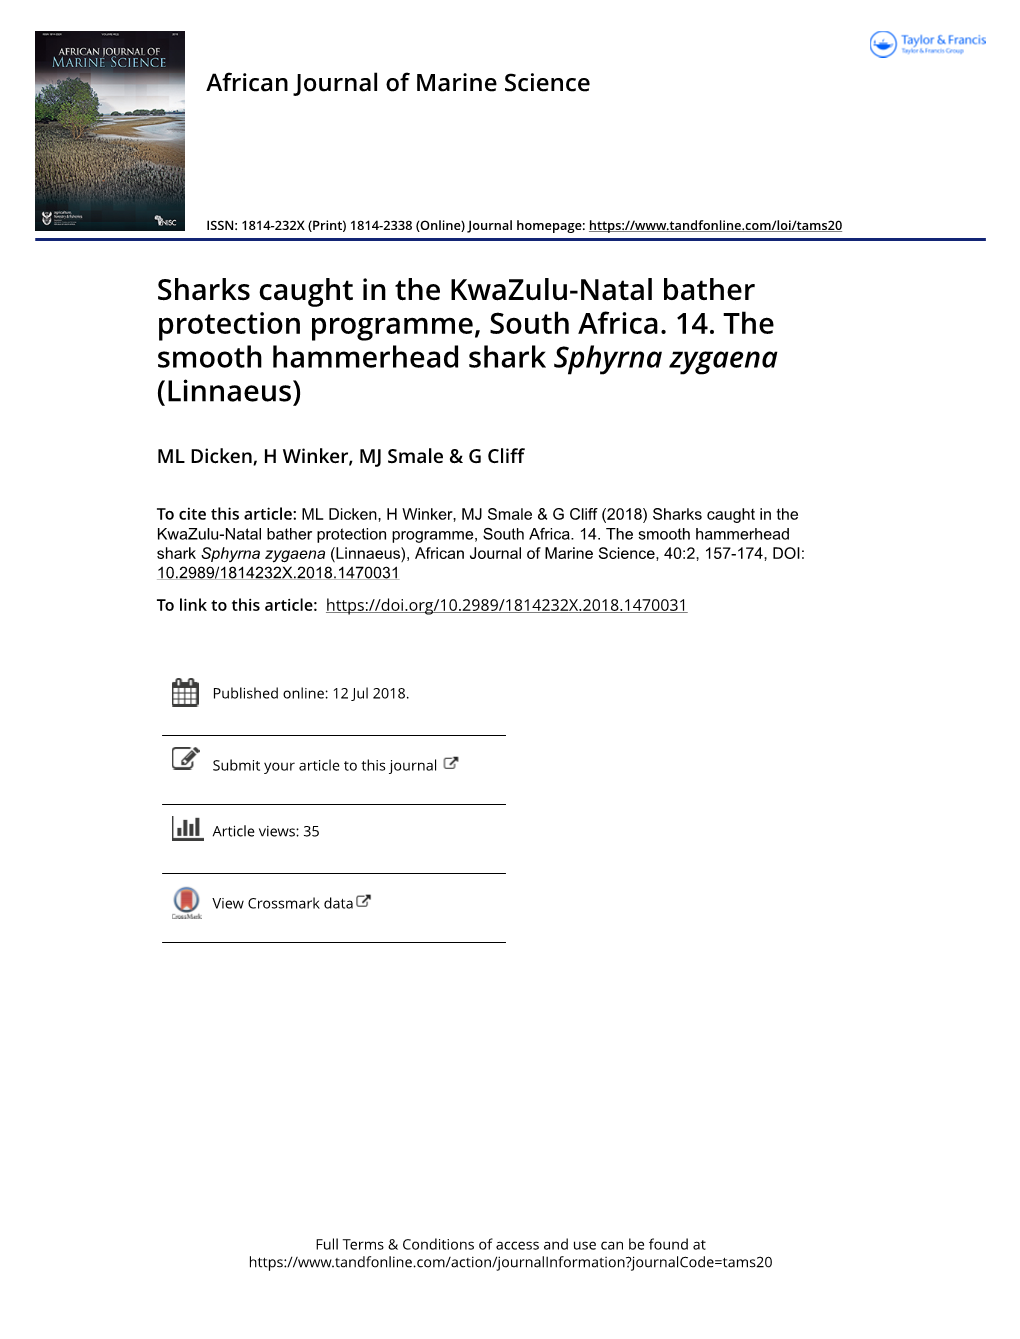 Sharks Caught in the Kwazulu-Natal Bather Protection Programme, South Africa